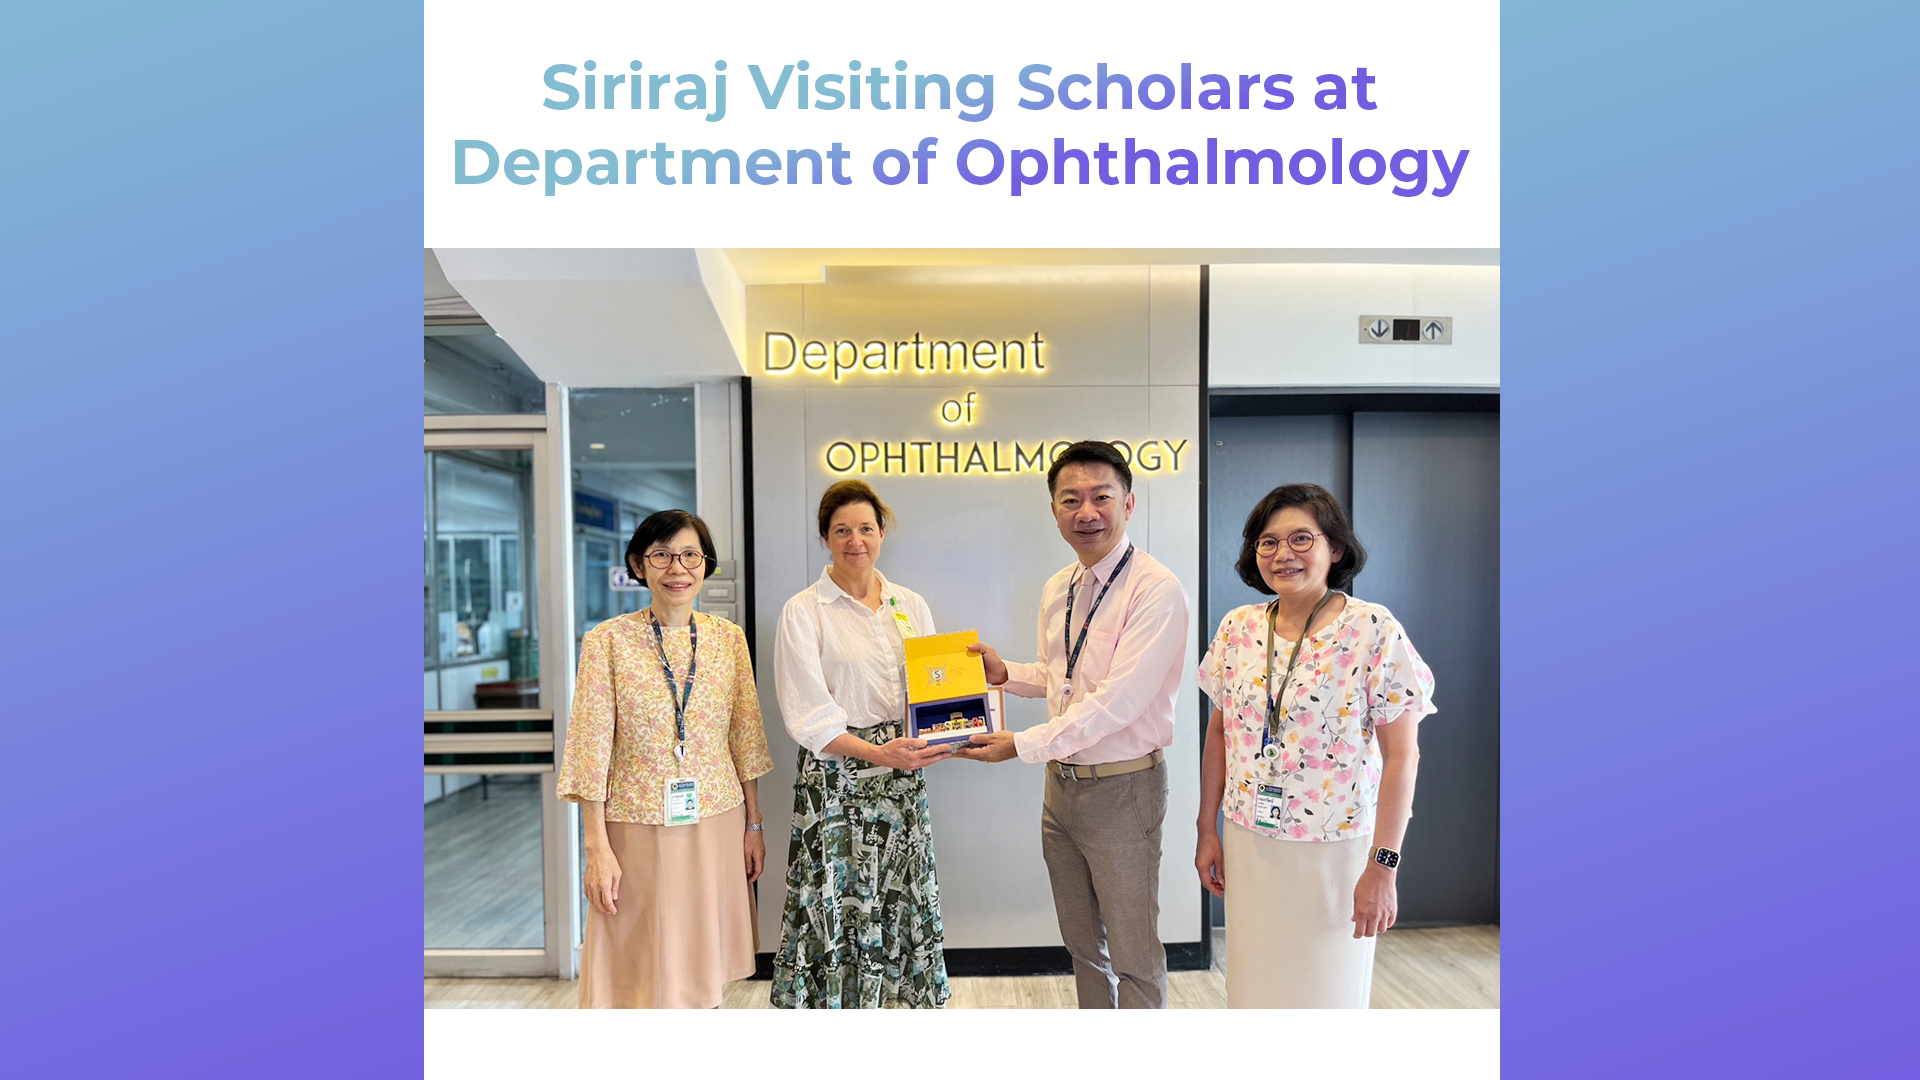 Siriraj Visiting Scholars at the Department of Ophthalmology